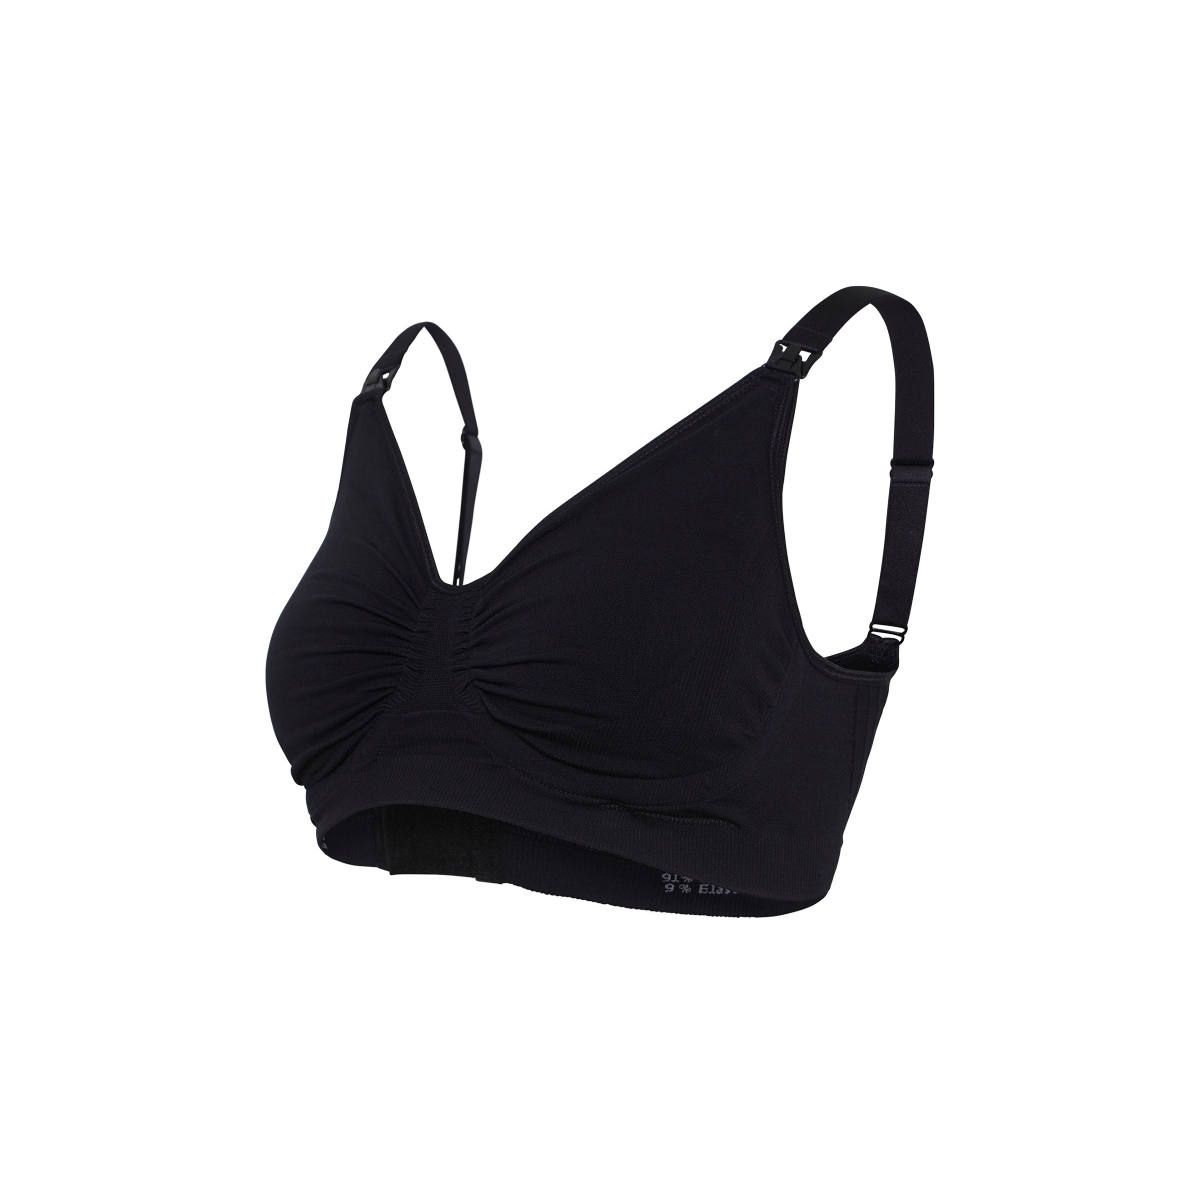 Carriwell Maternity & Nursing Bra with Padded Carri-Gel Support - Black (Size - XX